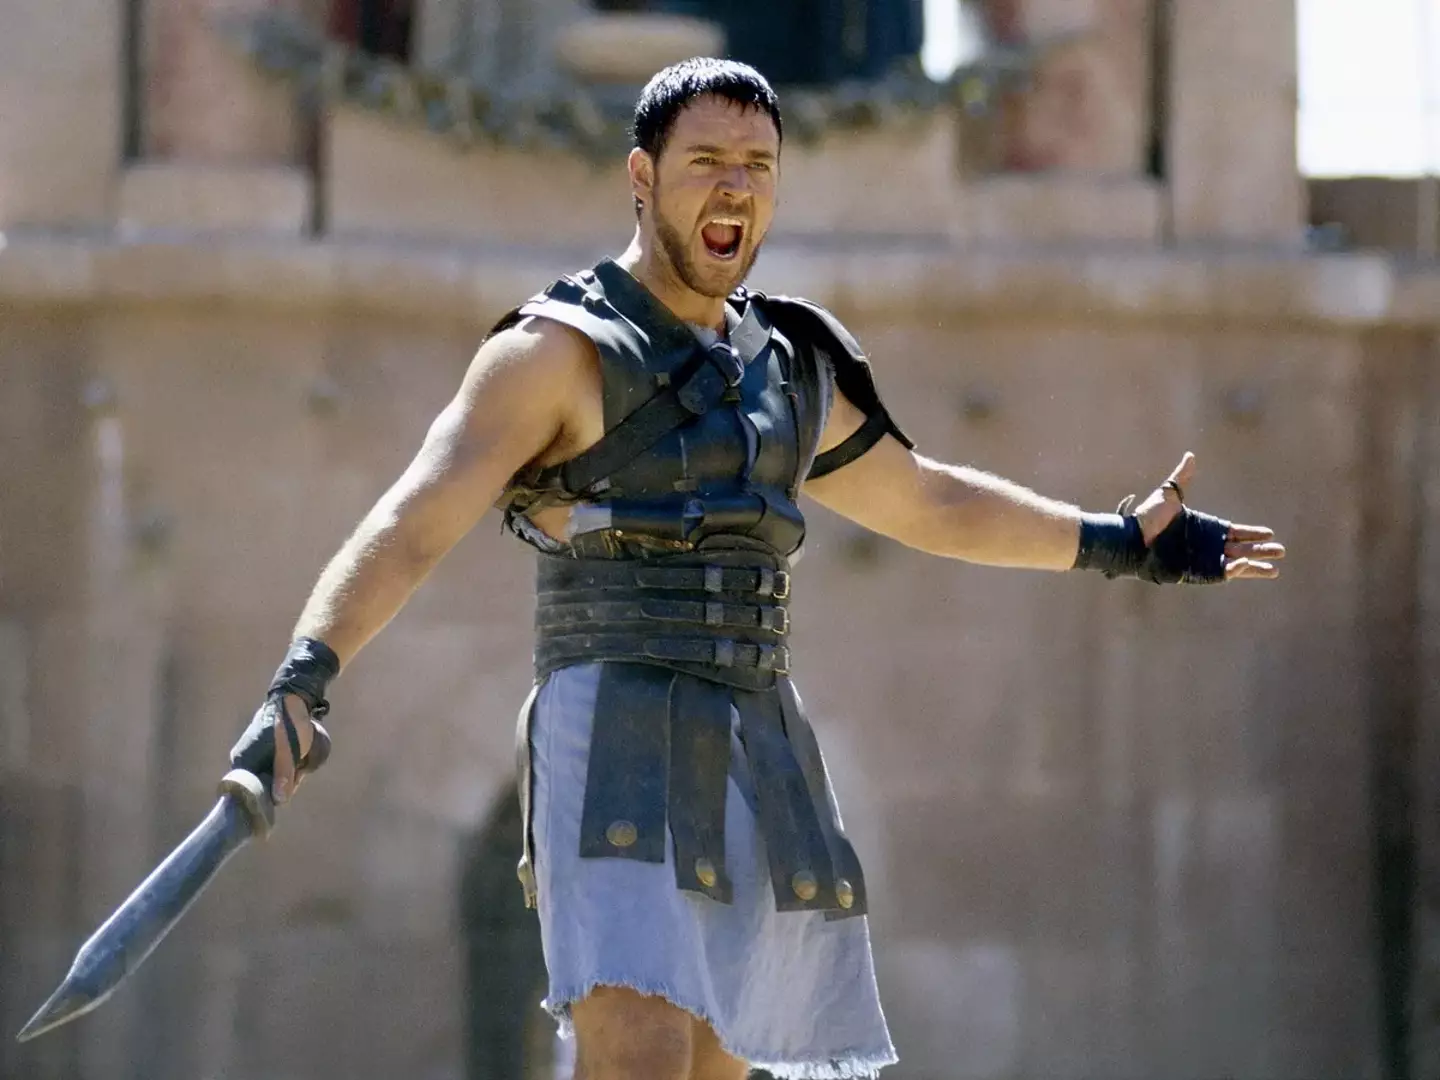 Russell Crowe won an Oscar for his role in Gladiator.